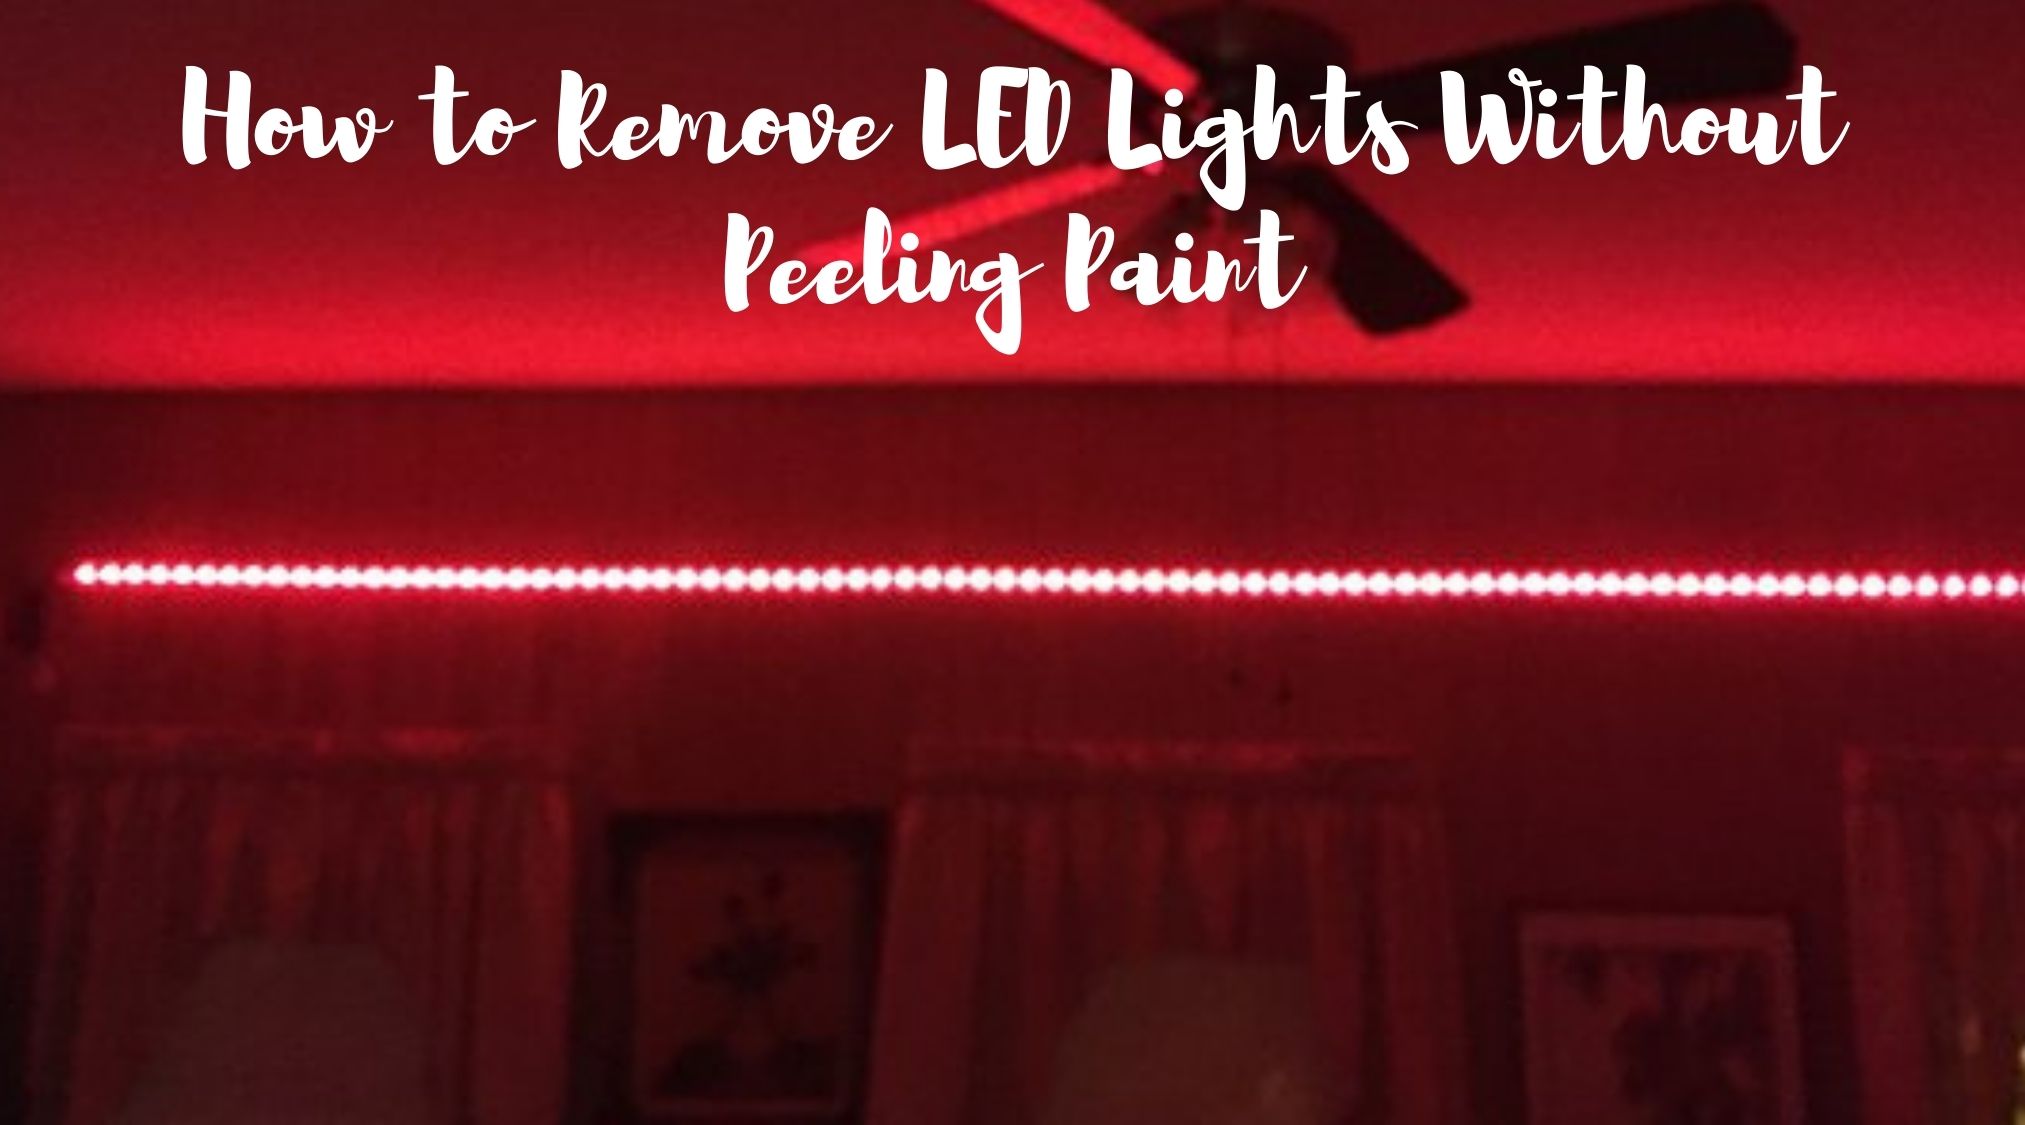 How to Remove LED Lights Without Peeling Paint